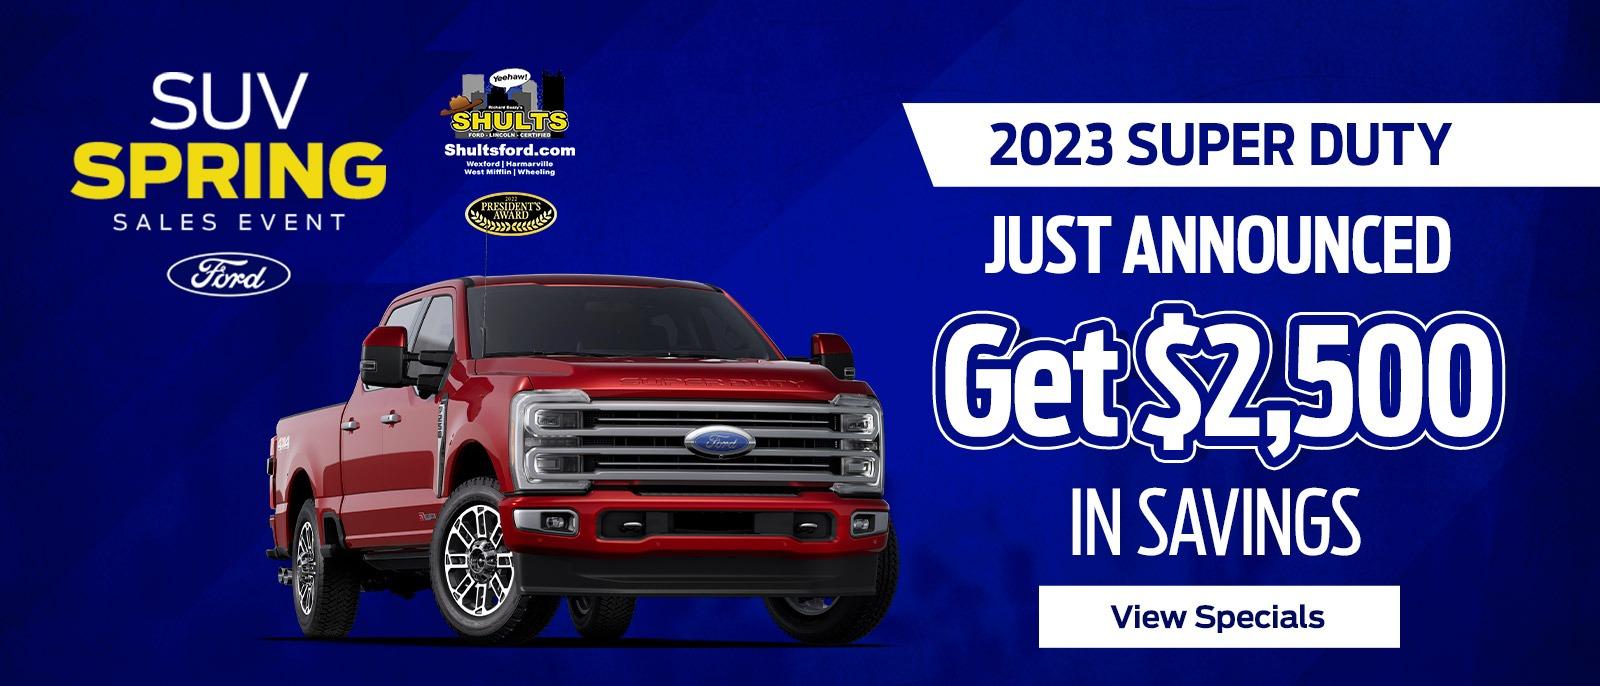 2023 Ford Super Duty Models | Pittsburgh, PA